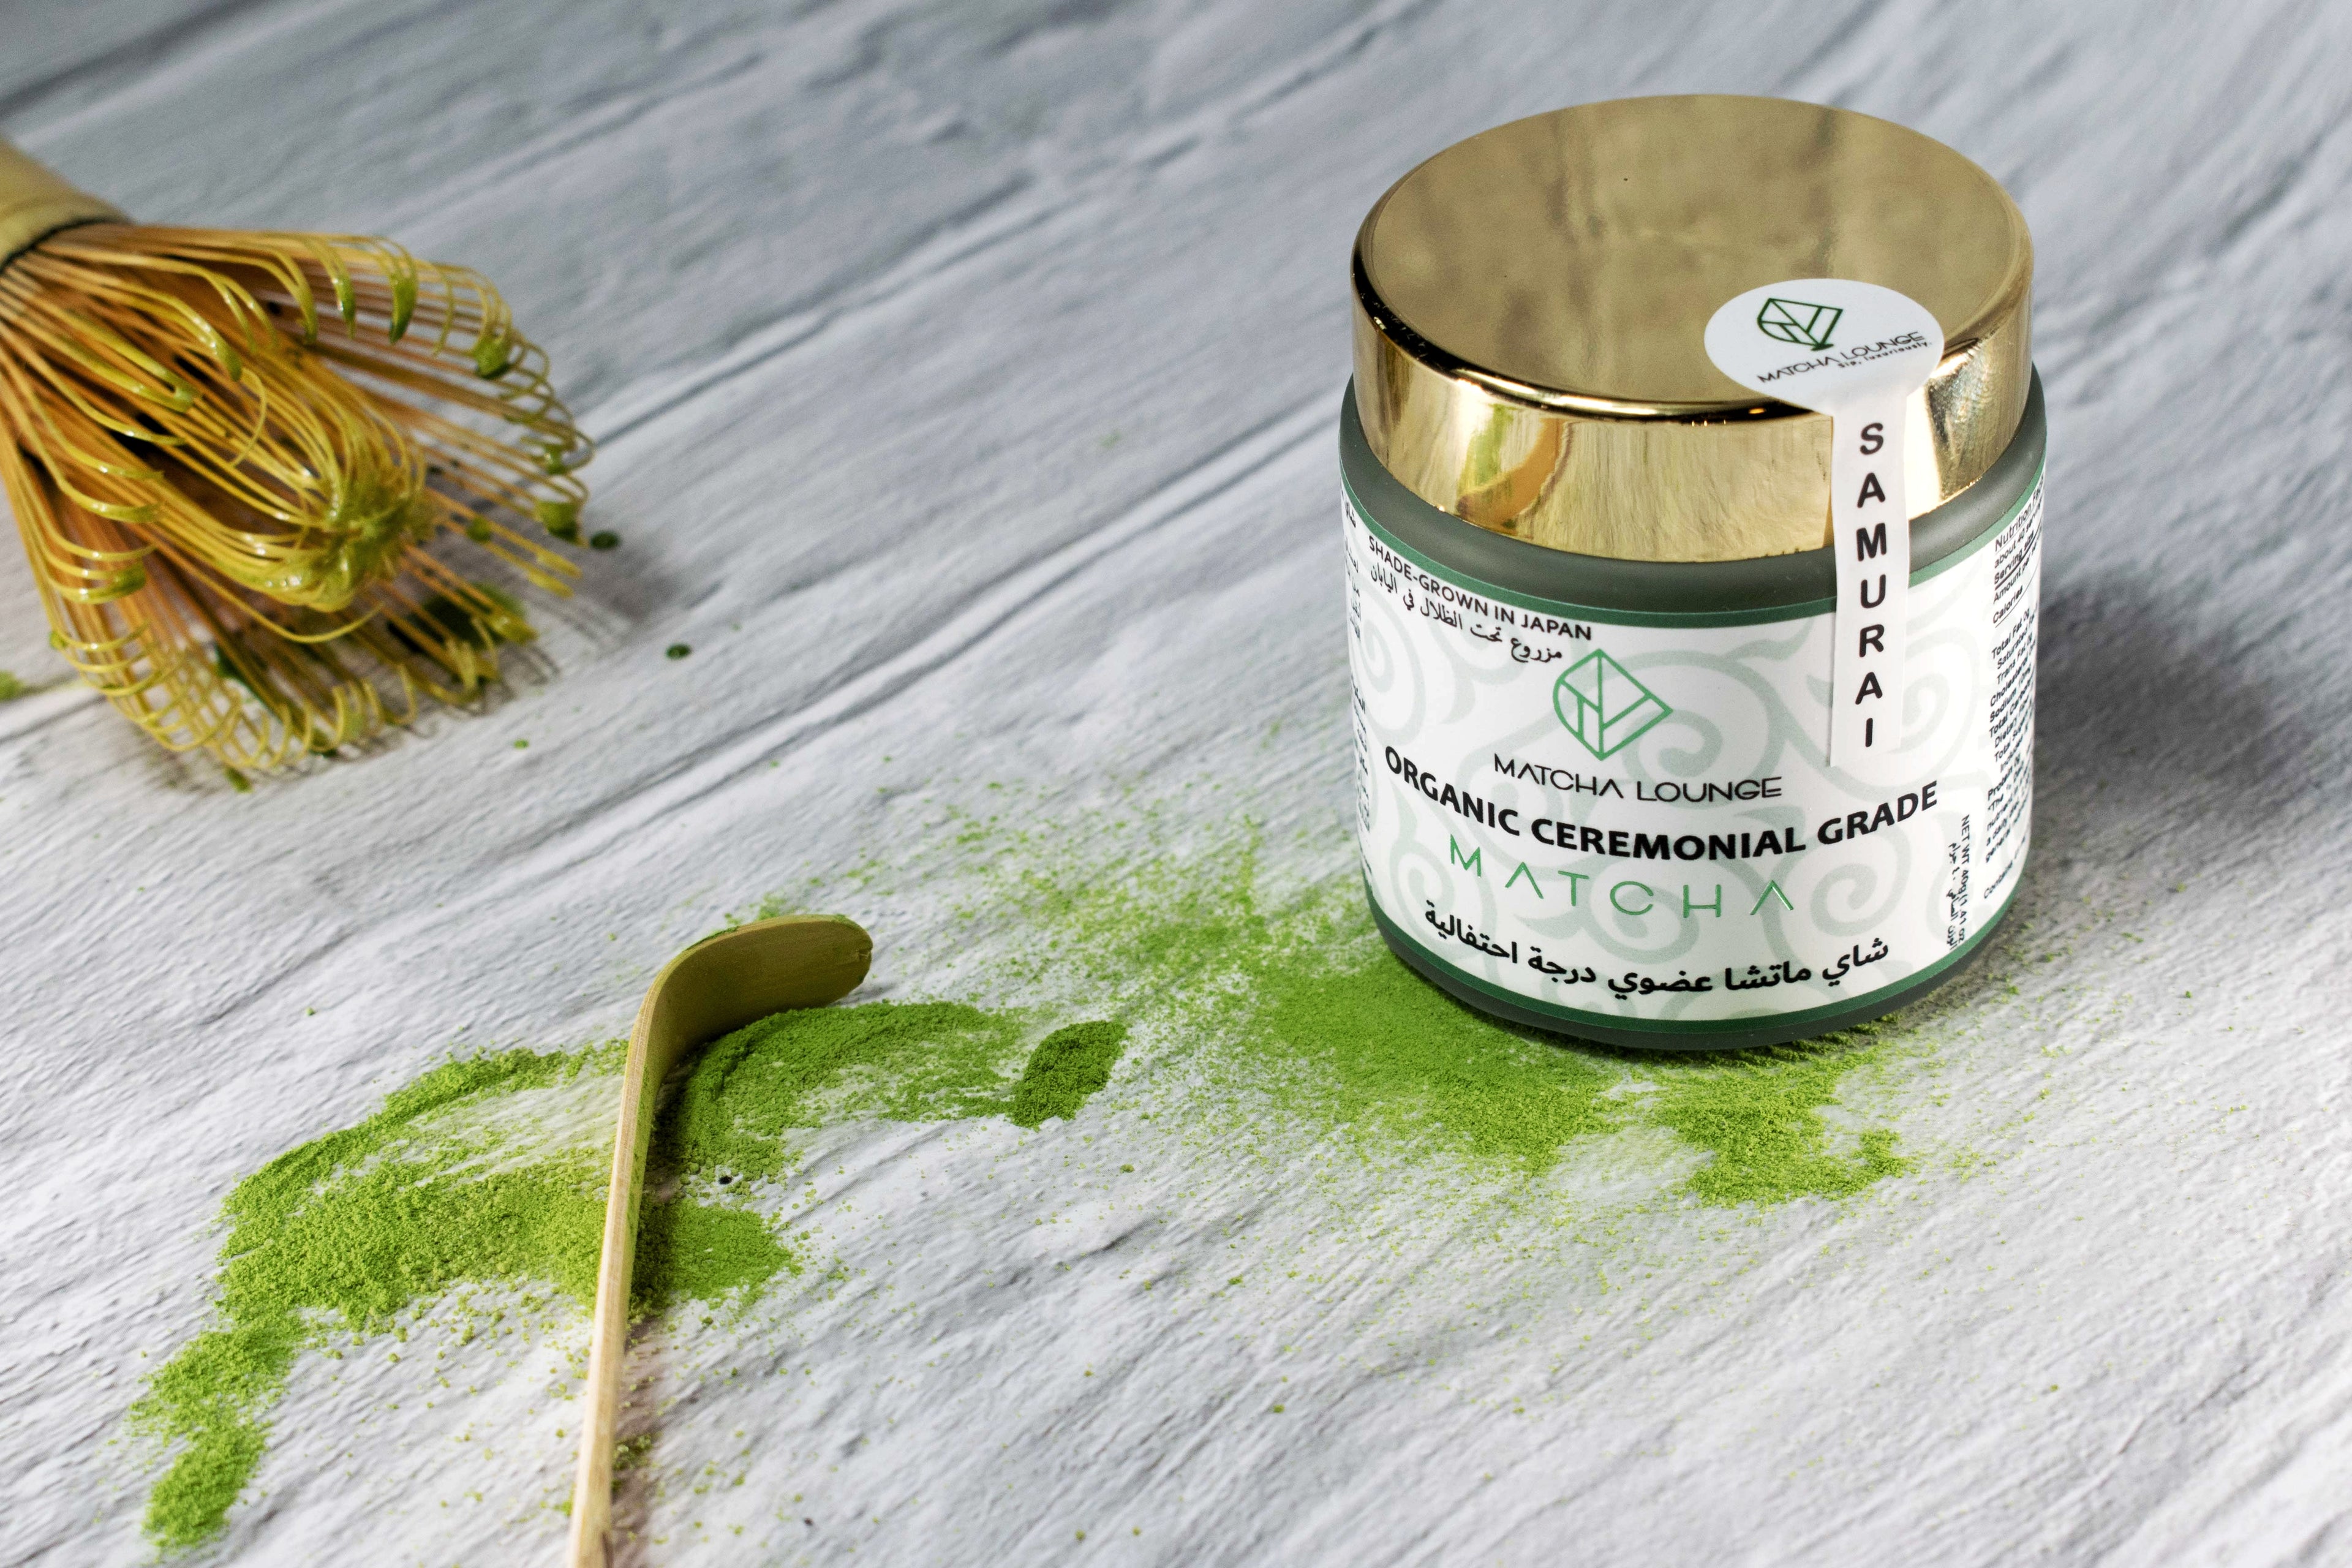 Superior in every way- taste, texture, and the vibrant green color found in only the highest quality and most exquisite ceremonial grade matcha teas in Japan. Ceremonial grade Samurai matcha, shade-grown and first harvested from the youngest leaves of the green tea plant. Delivered to you across Dubai and the UAE.